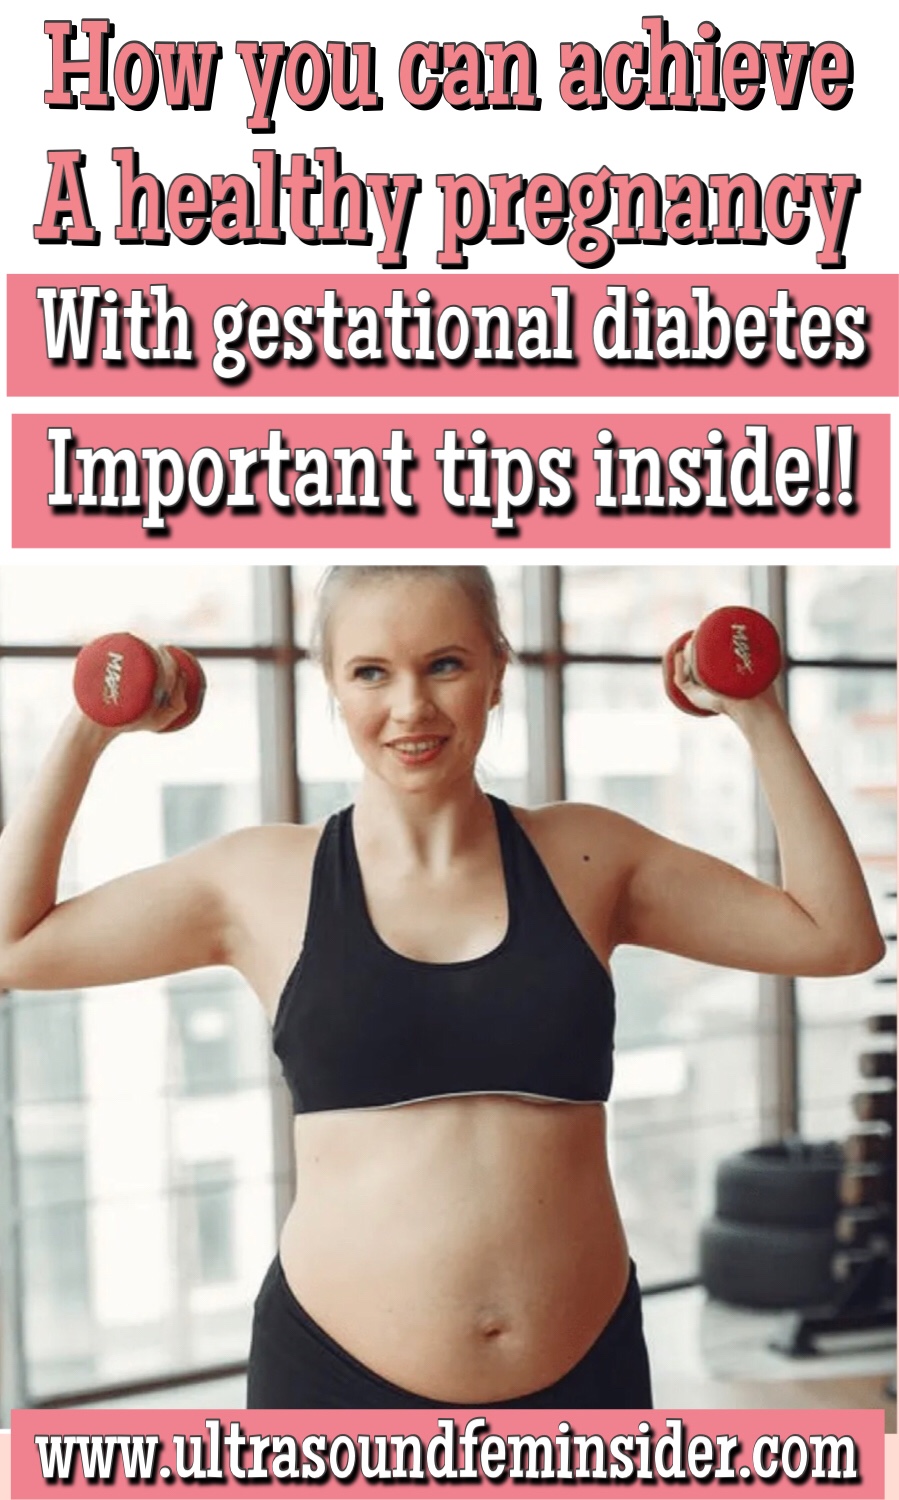 How to deal and cope with gestational diabetes foe a healthier pregnancy. 